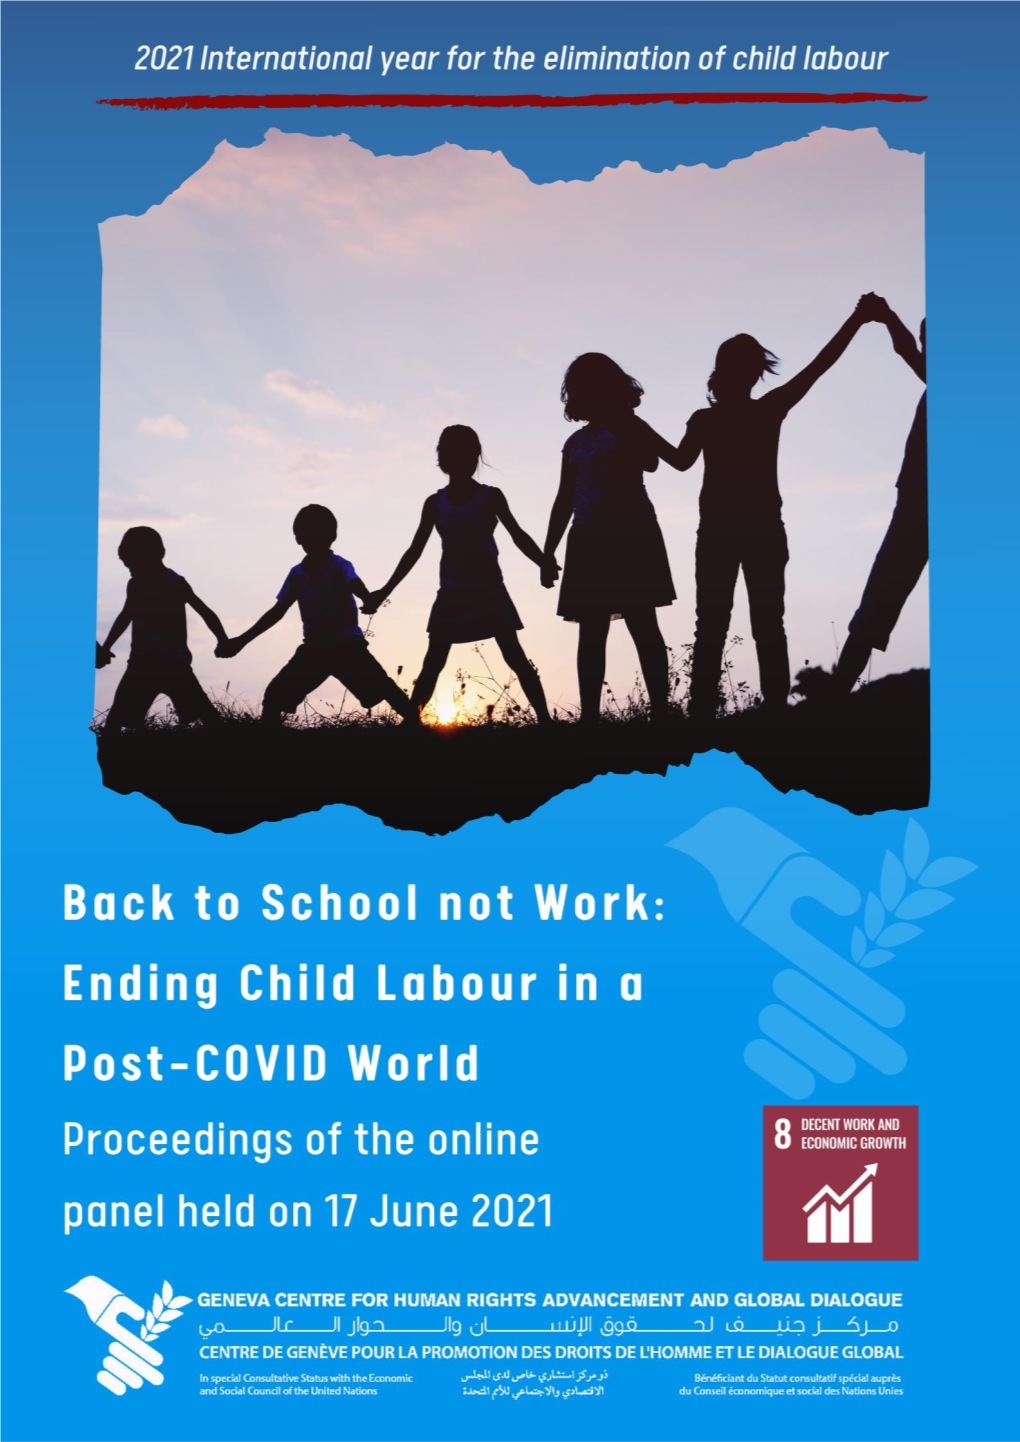 School Not Work: Ending Child Labour in a Post-Covid World”